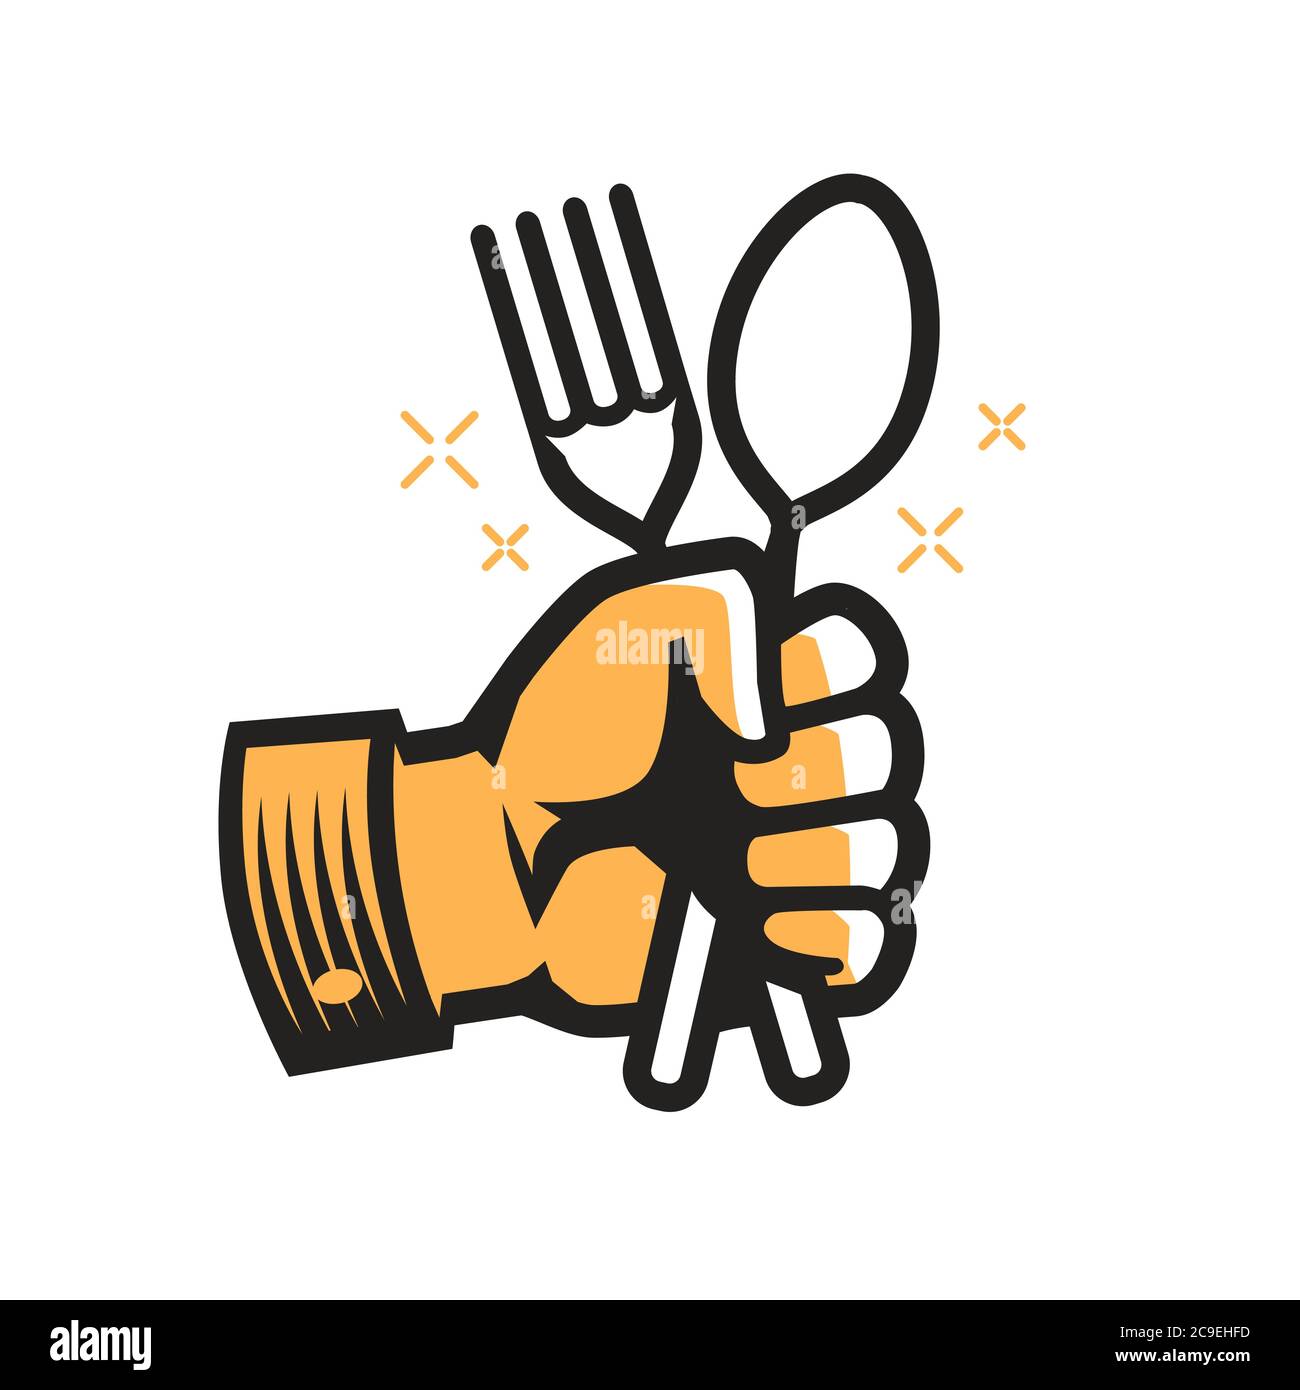 Fork and spoon in hand symbol. Cooking, cookery, restaurant, food concept Stock Vector